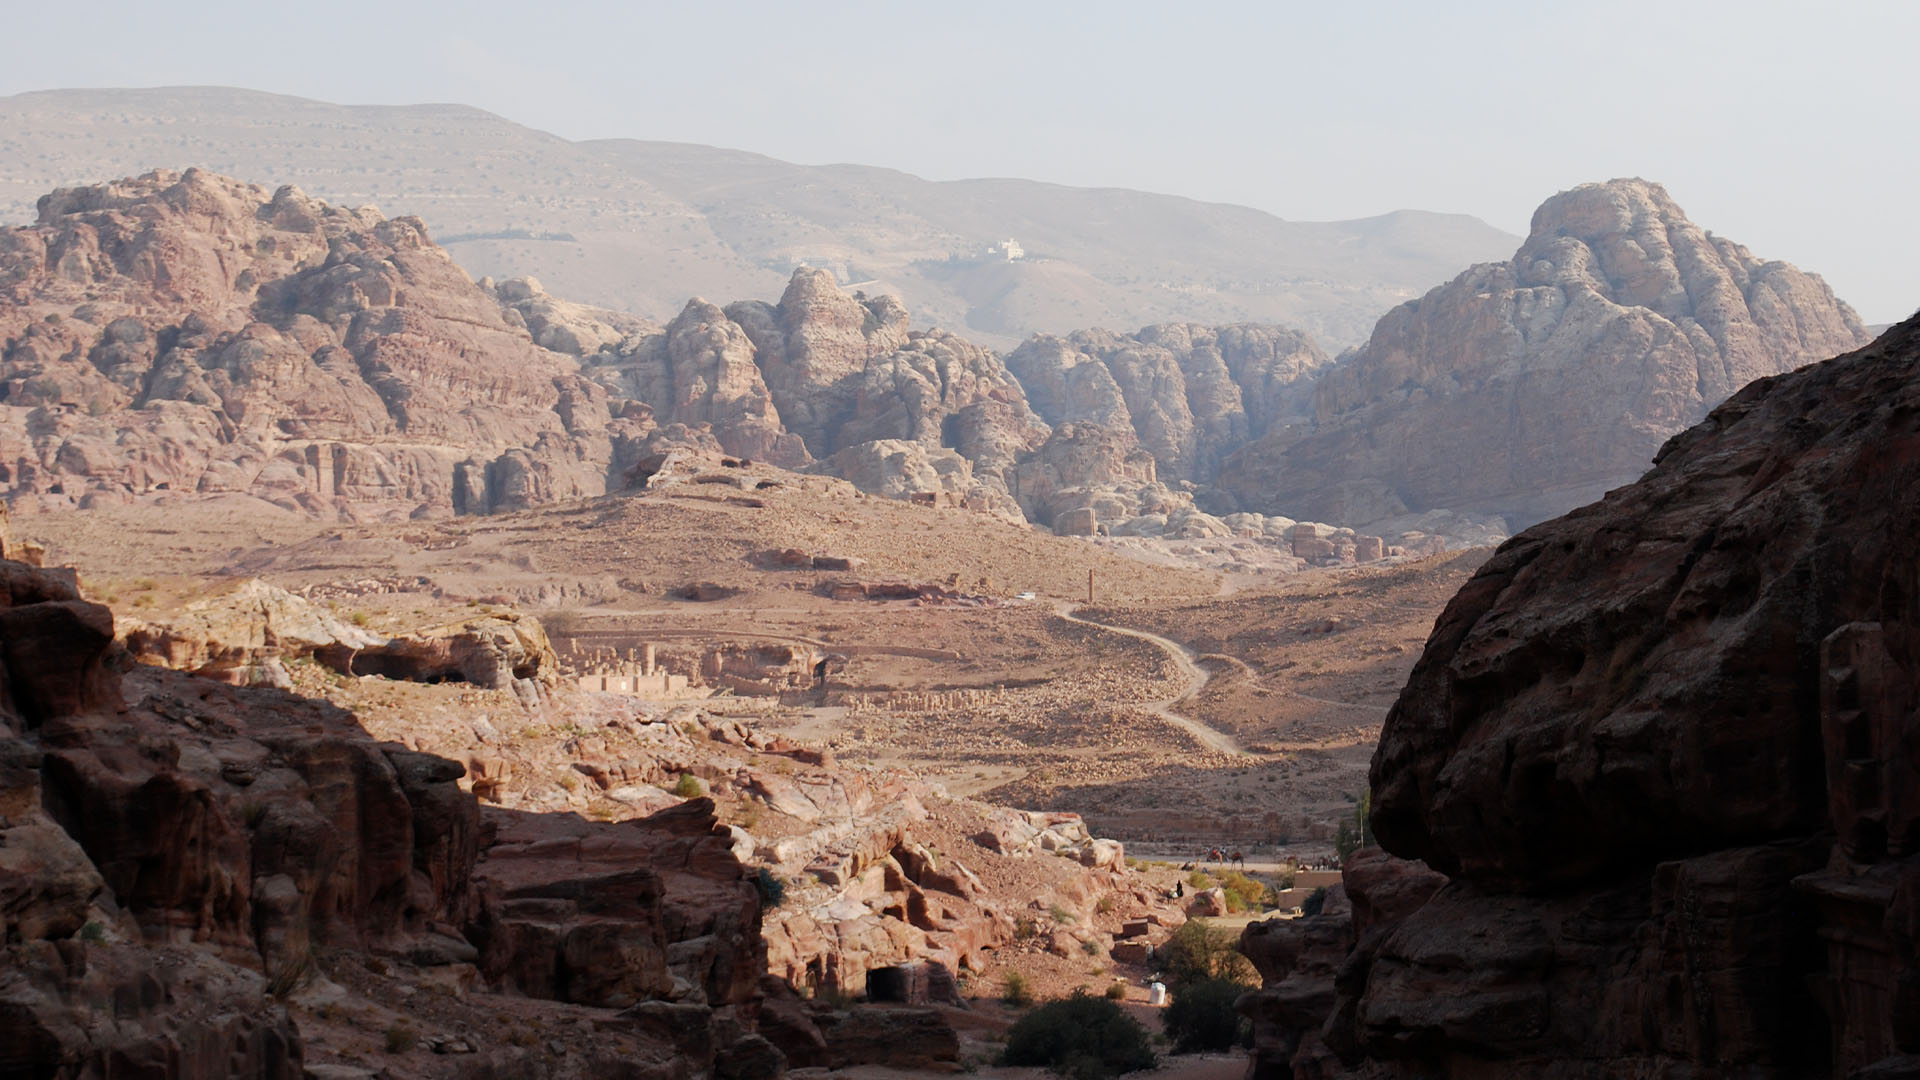 A panoramic photograph immortalizes Jebel Shams, situated in the Al Hajar mountain range, providing awe-inspiring vistas of a majestic mountain range that stretches as far as the eye can see.